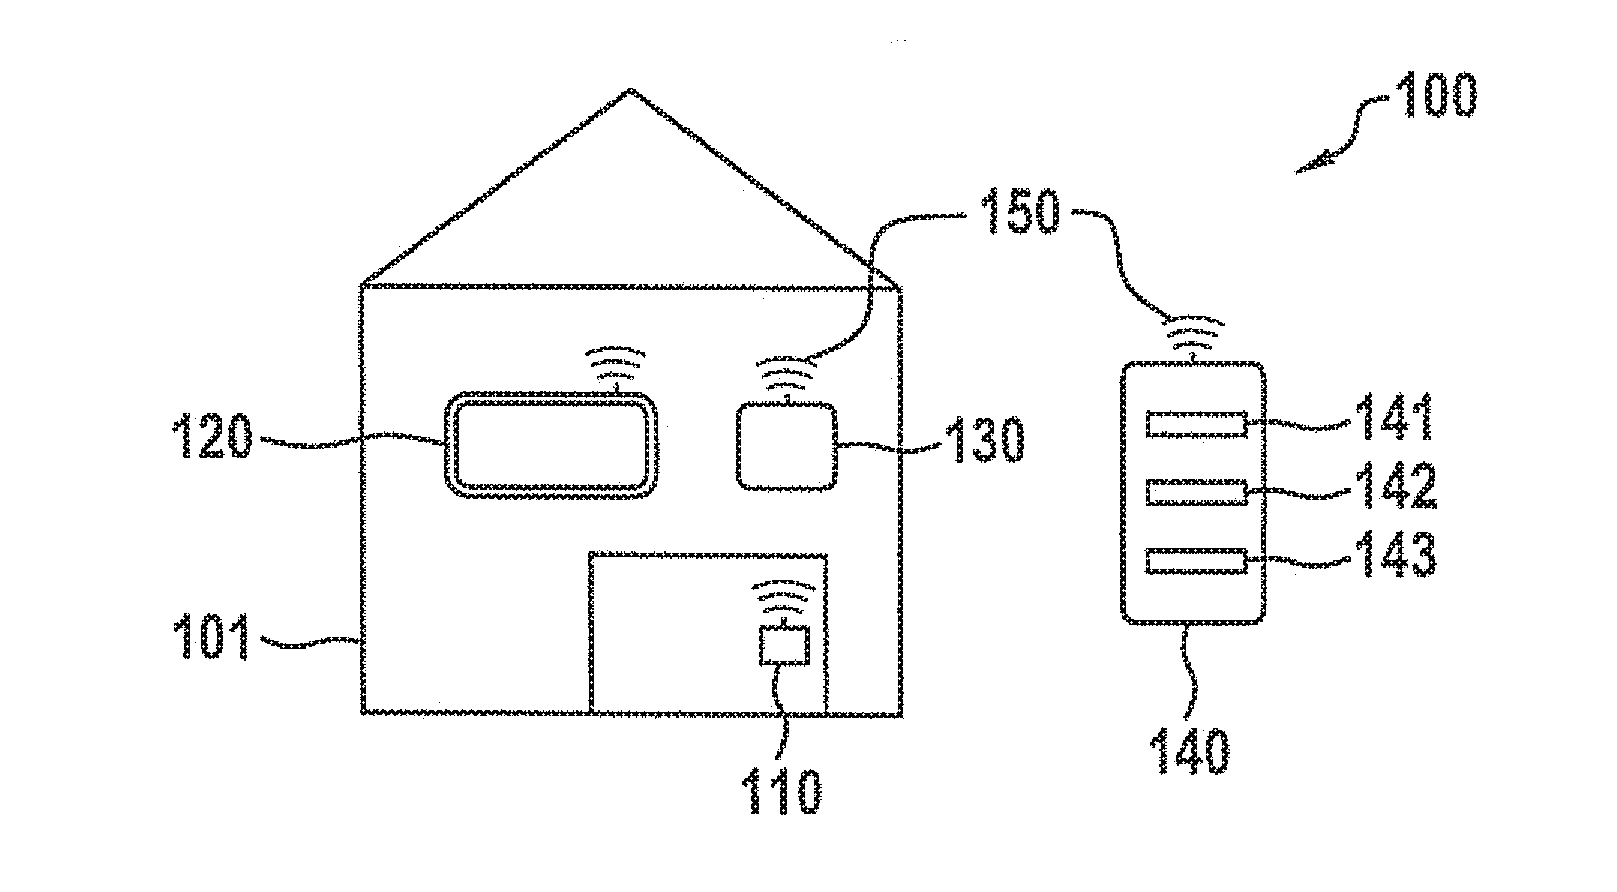 Method for executing a safety-critical function of a computing unit in a cyber-physical system